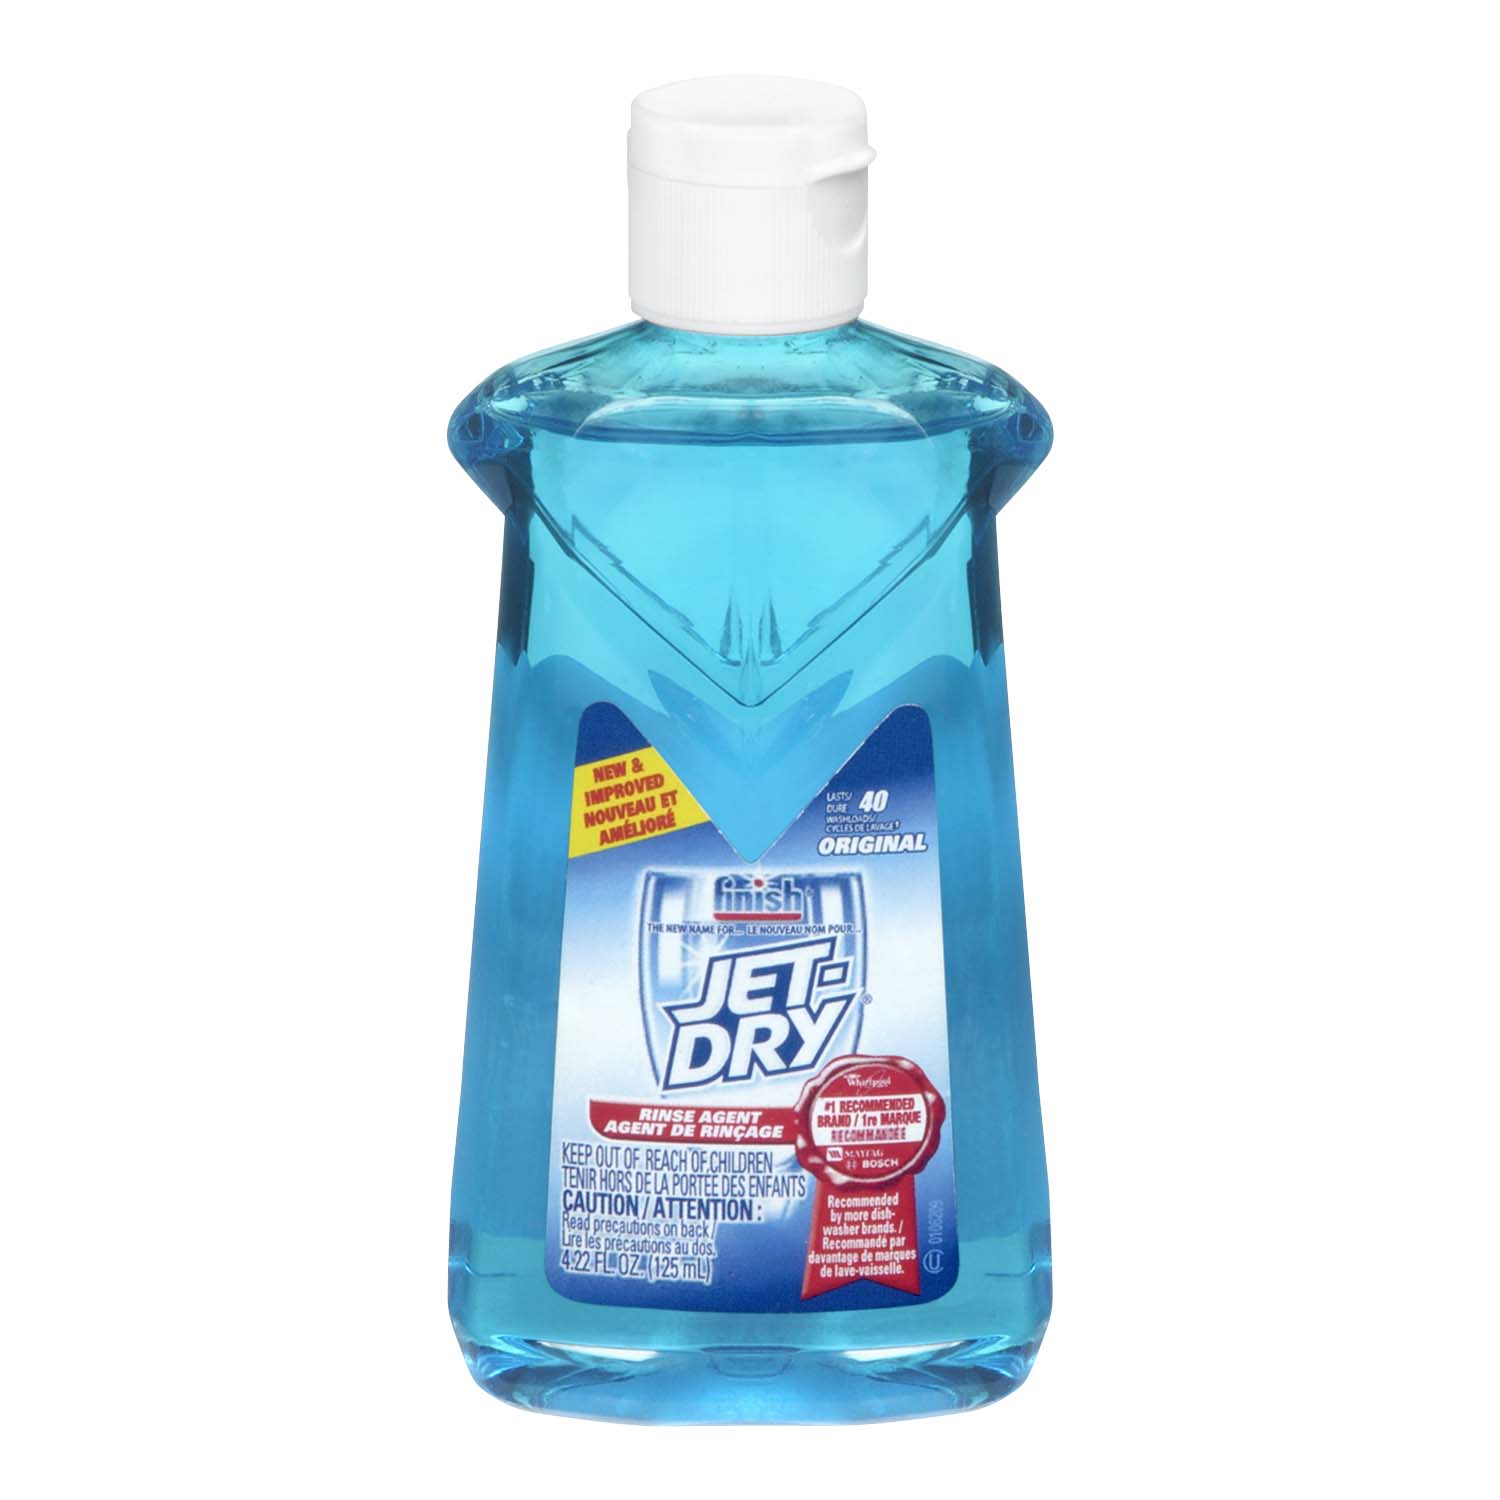 JET DRY RINSE AGENT  Powell's Supermarkets